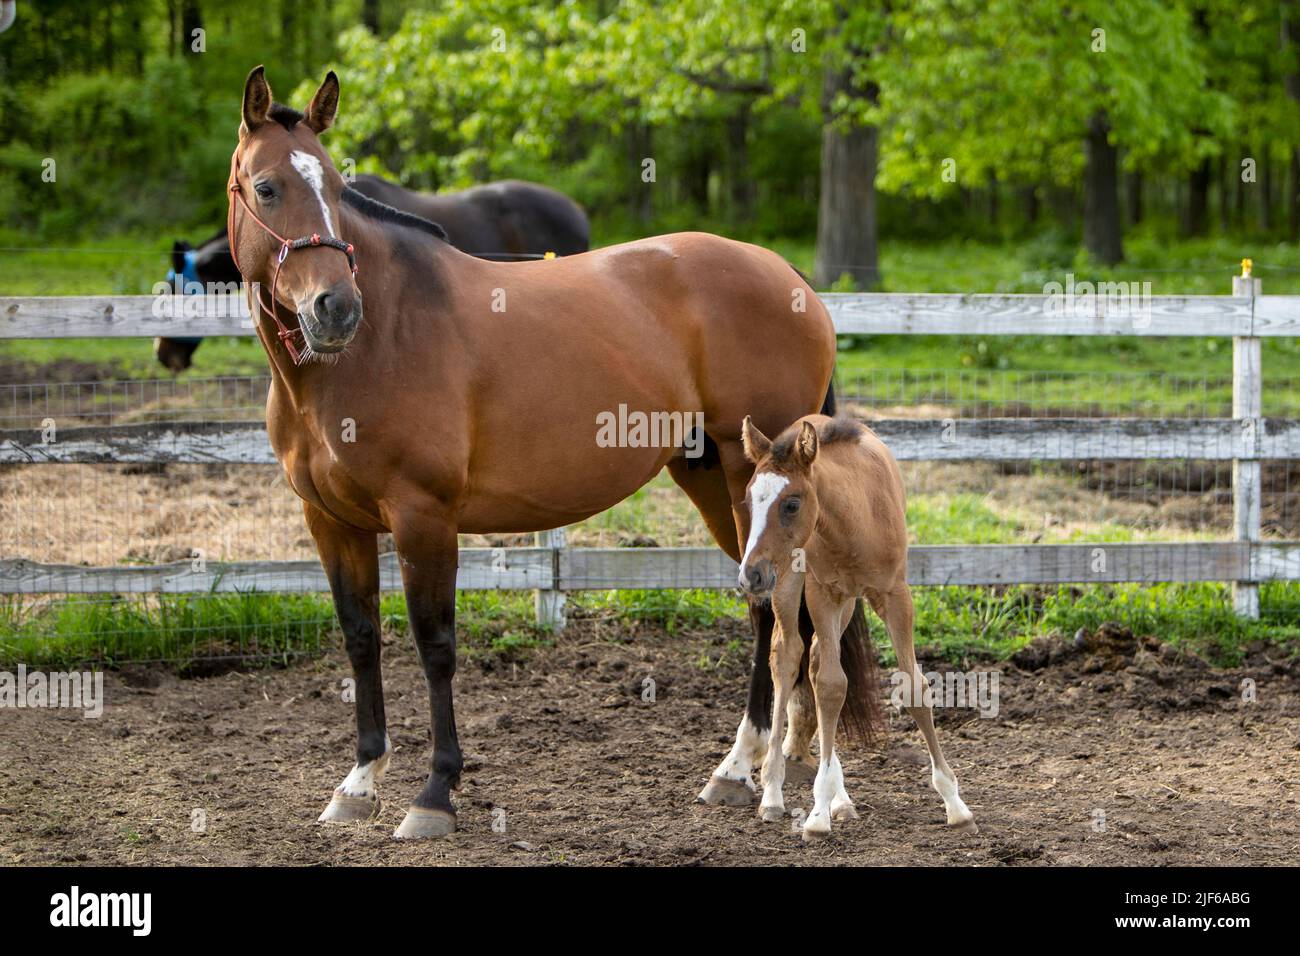 A foal standing next to her mother horse in a paddock. Stock Photo